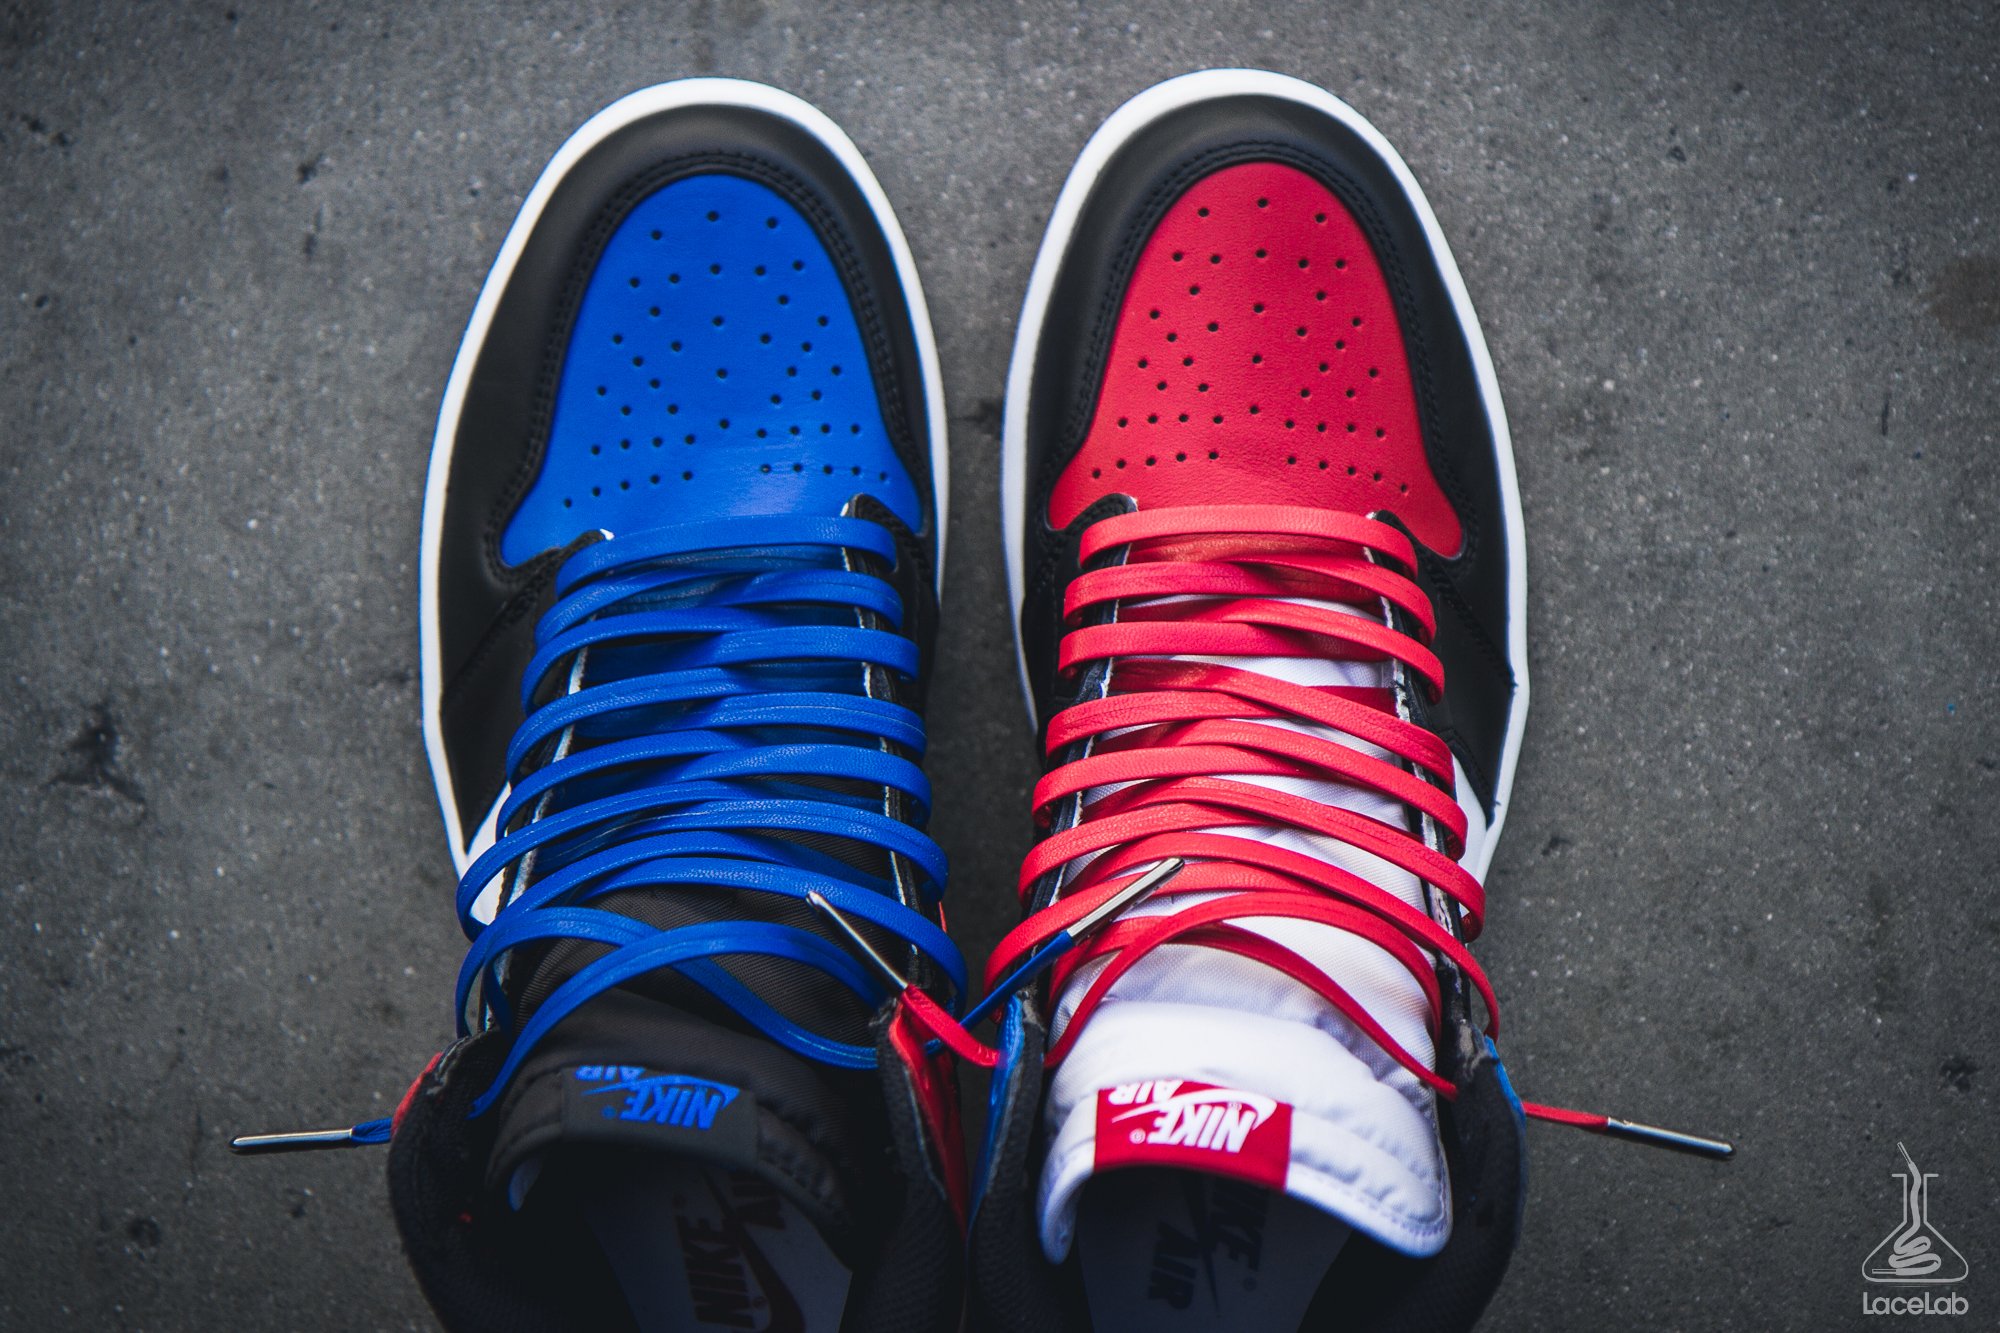 Lace Lab Jordan 1 Top 3 Swapped With Our Royal Blue And Red Luxury Leather Laces Grab A Pair Of Leather Laces Here T Co Vw1xrwiszv T Co Xfclksujjx Twitter